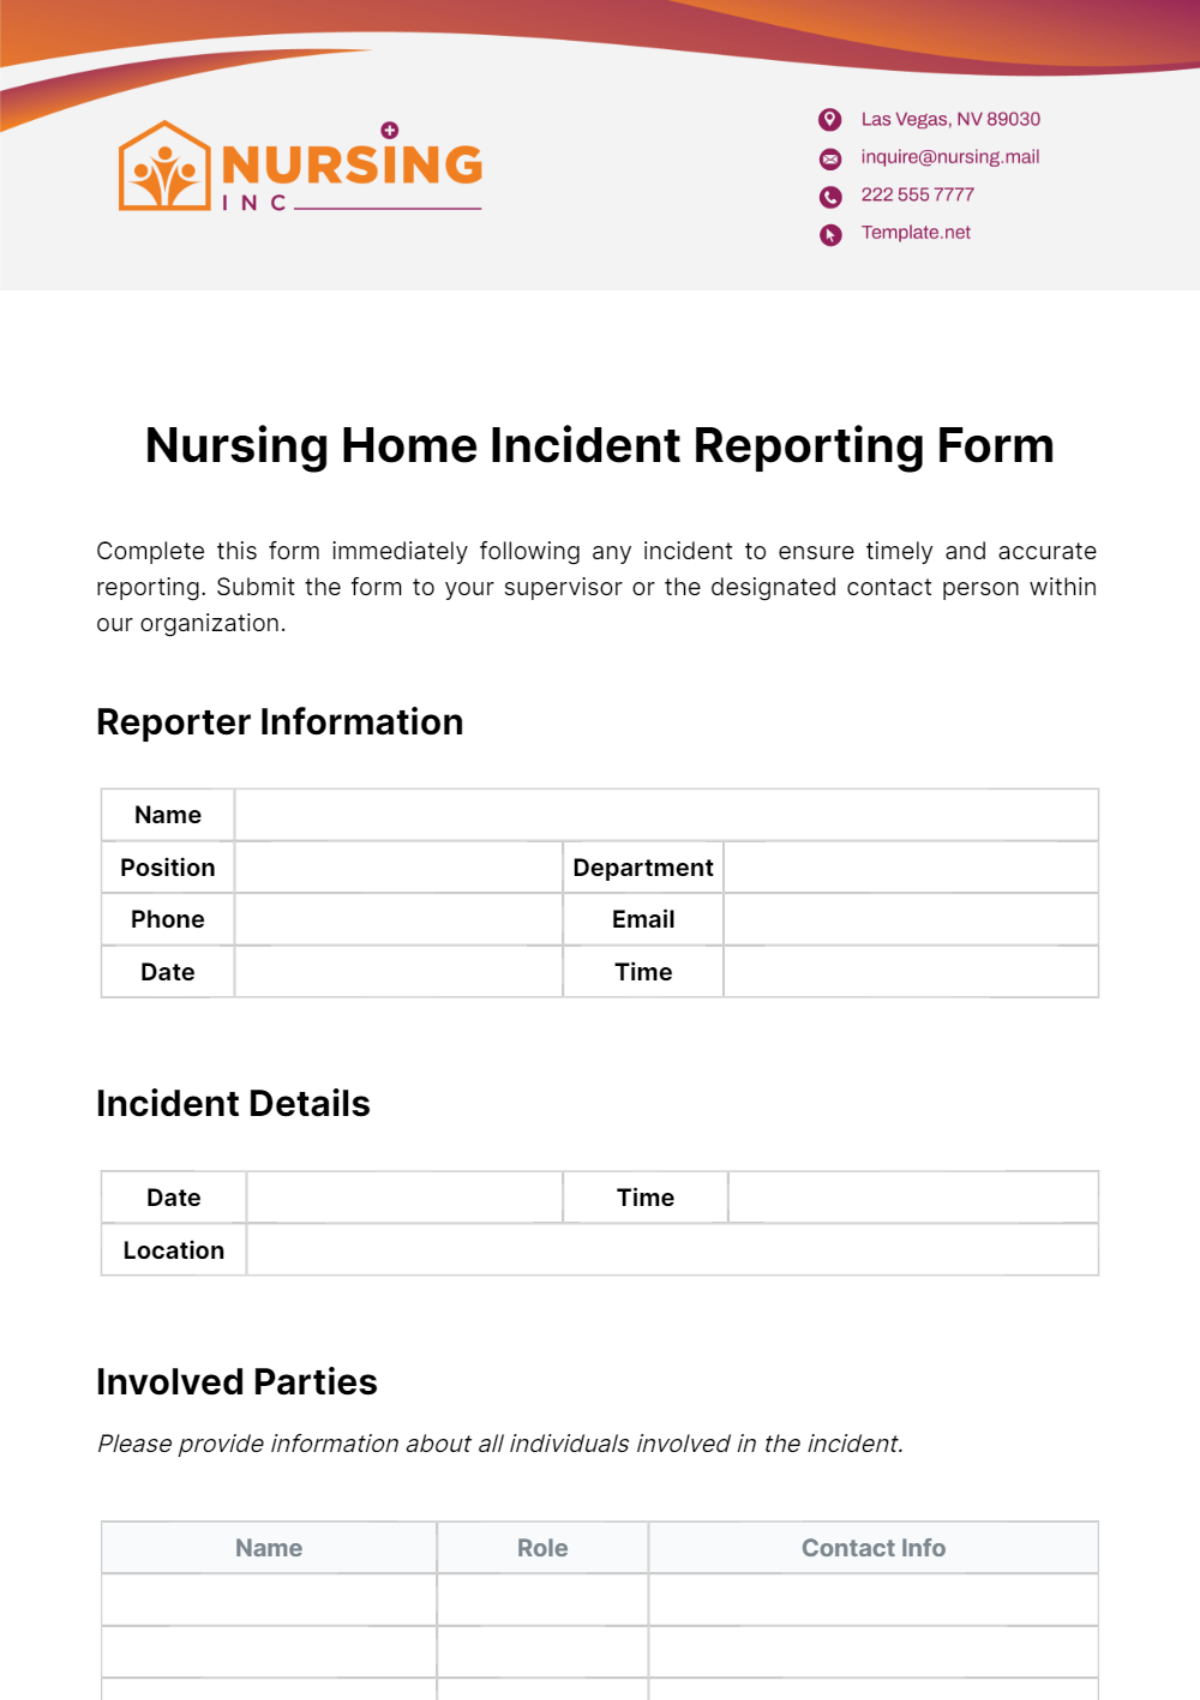 Free Nursing Home Incident Reporting Form Template